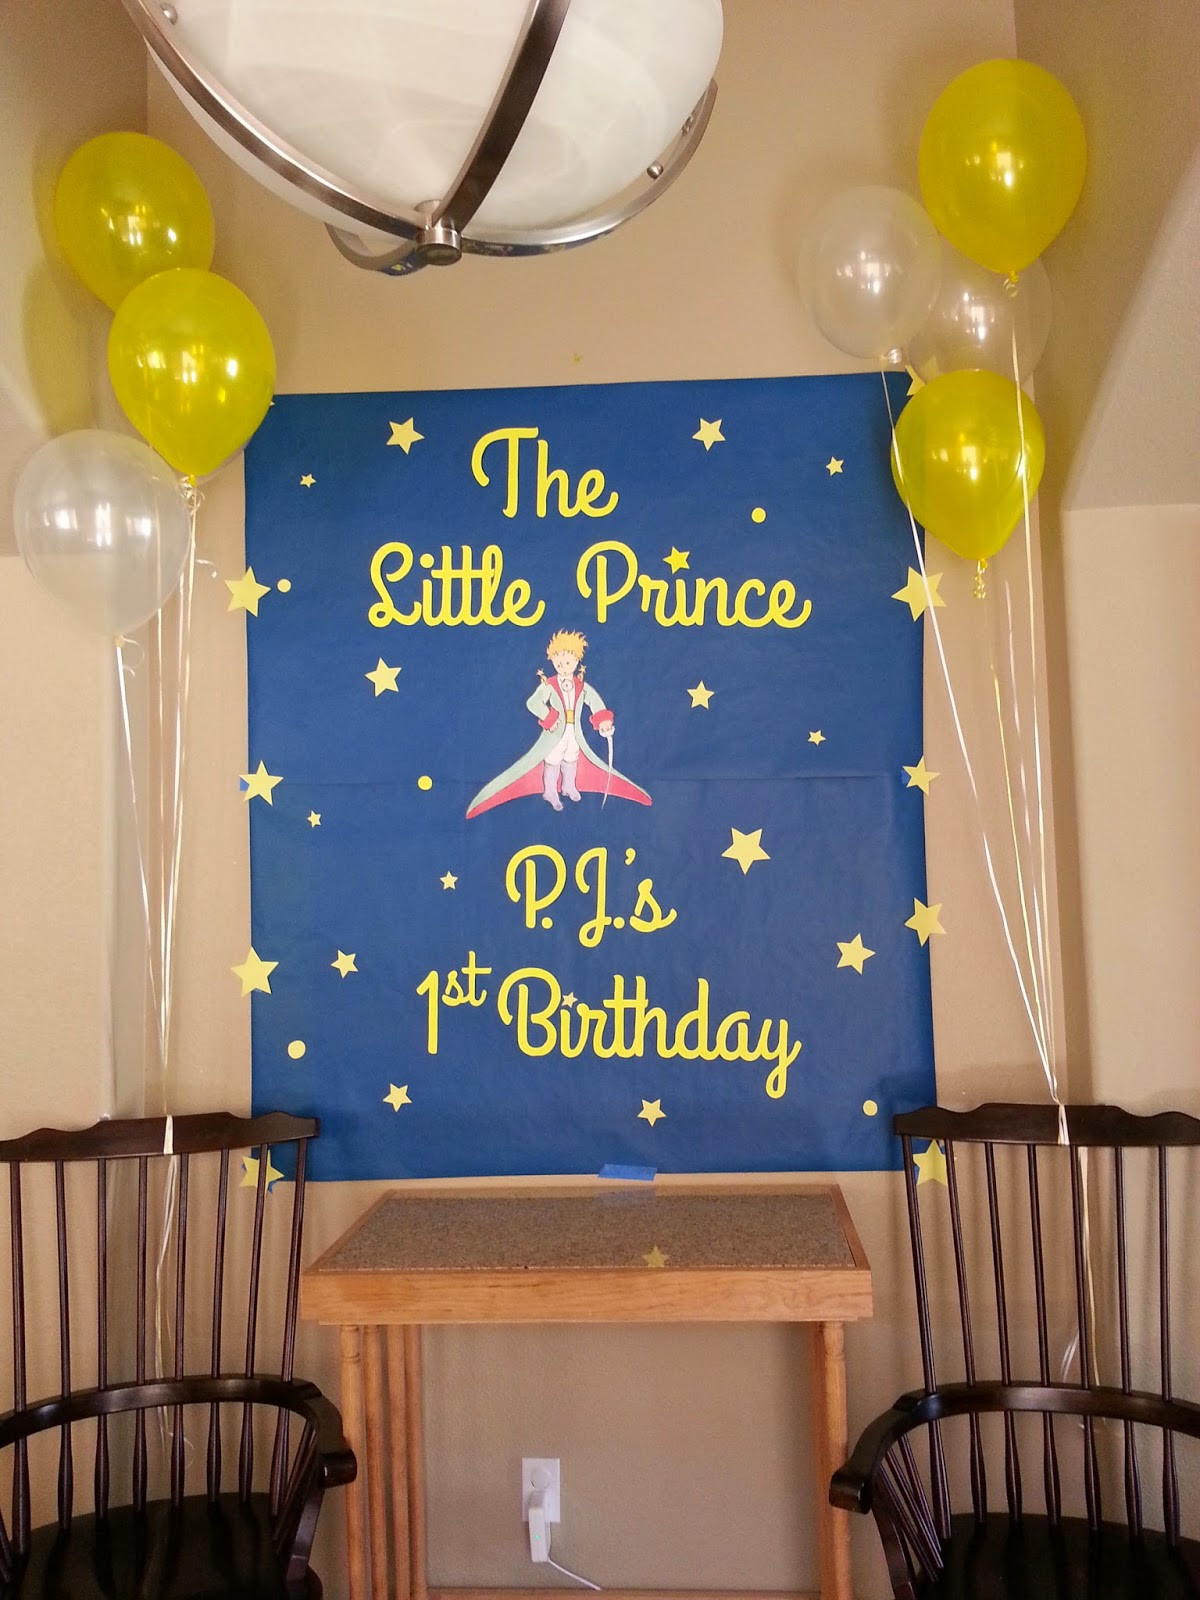 Prince Themed Birthday Party
 The Little Prince Birthday Party